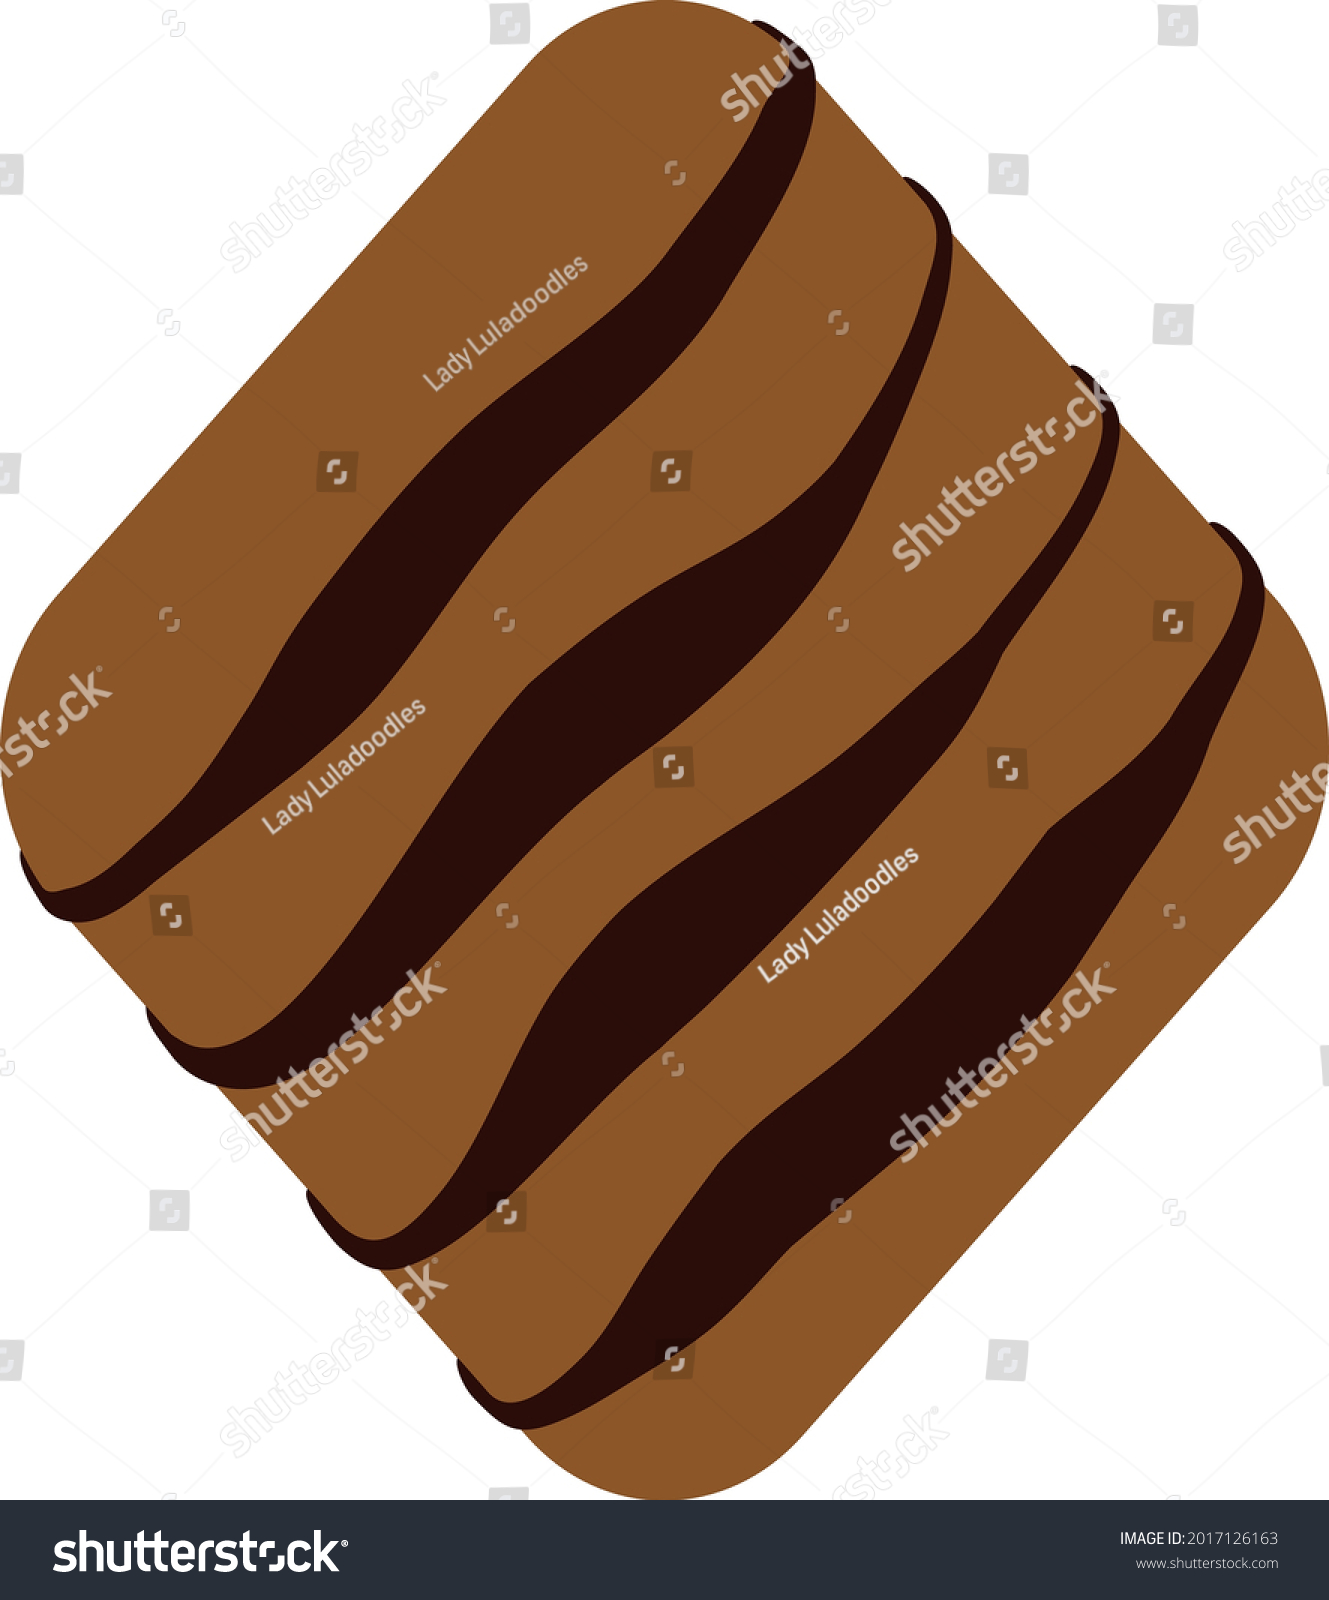 SVG of Milk light diamond shaped chocolate candy with dark piping. Confectionary layered SVG svg